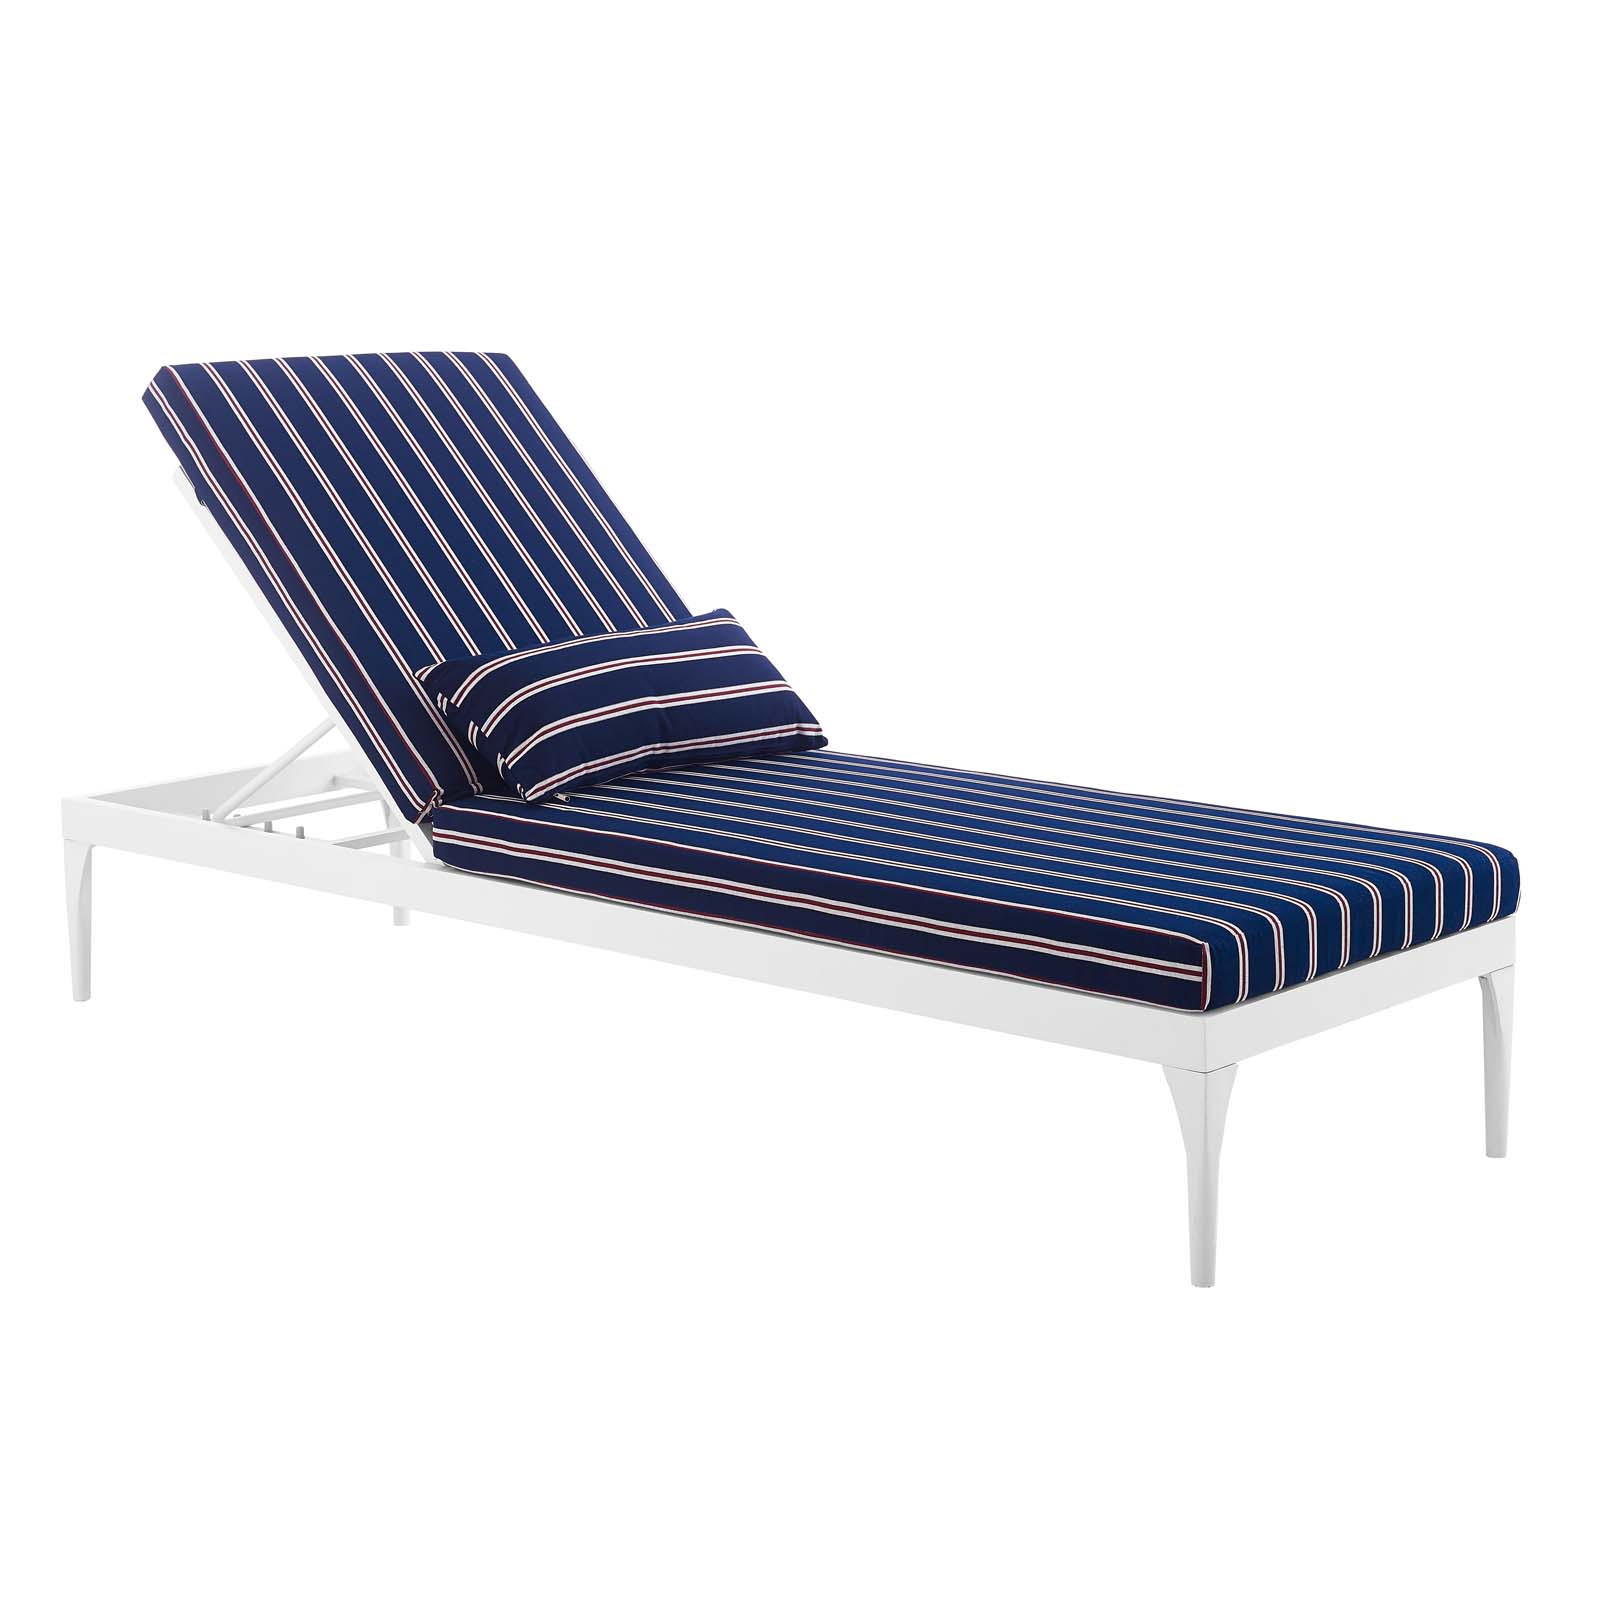 Modern Contemporary Urban Design Outdoor Patio Balcony Garden Furniture Lounge Chair Chaise, Fabric Metal Steel, White Navy - image 3 of 7